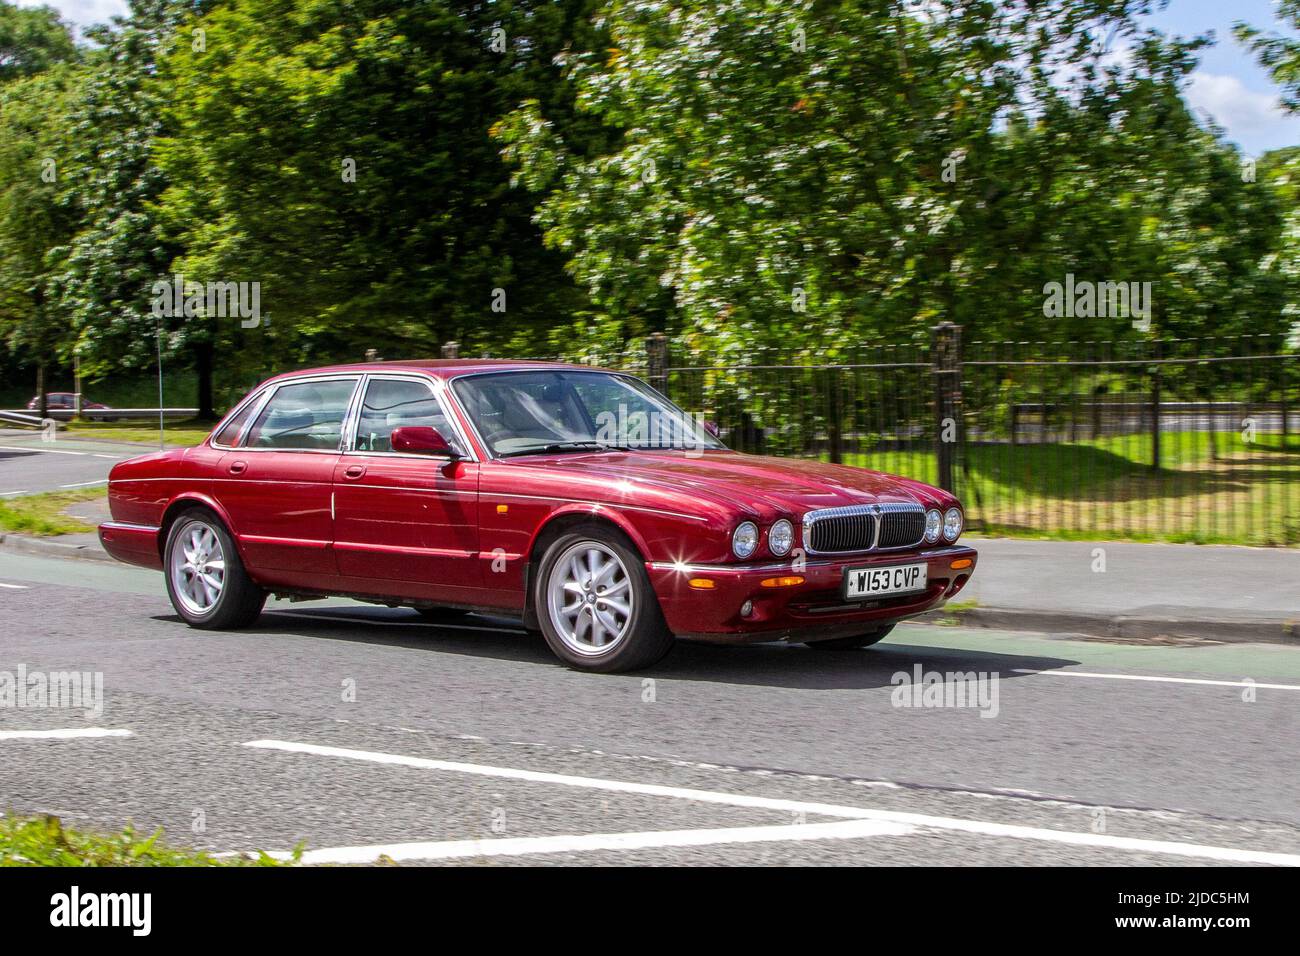 2000 red British Jaguar XJ XJ8 3248cc 5 speed automatic 4dr sedan; automobiles featured during the 58th year of the Manchester to Blackpool Touring Assembly for Veteran, Vintage, Classic and Cherished cars. Stock Photo